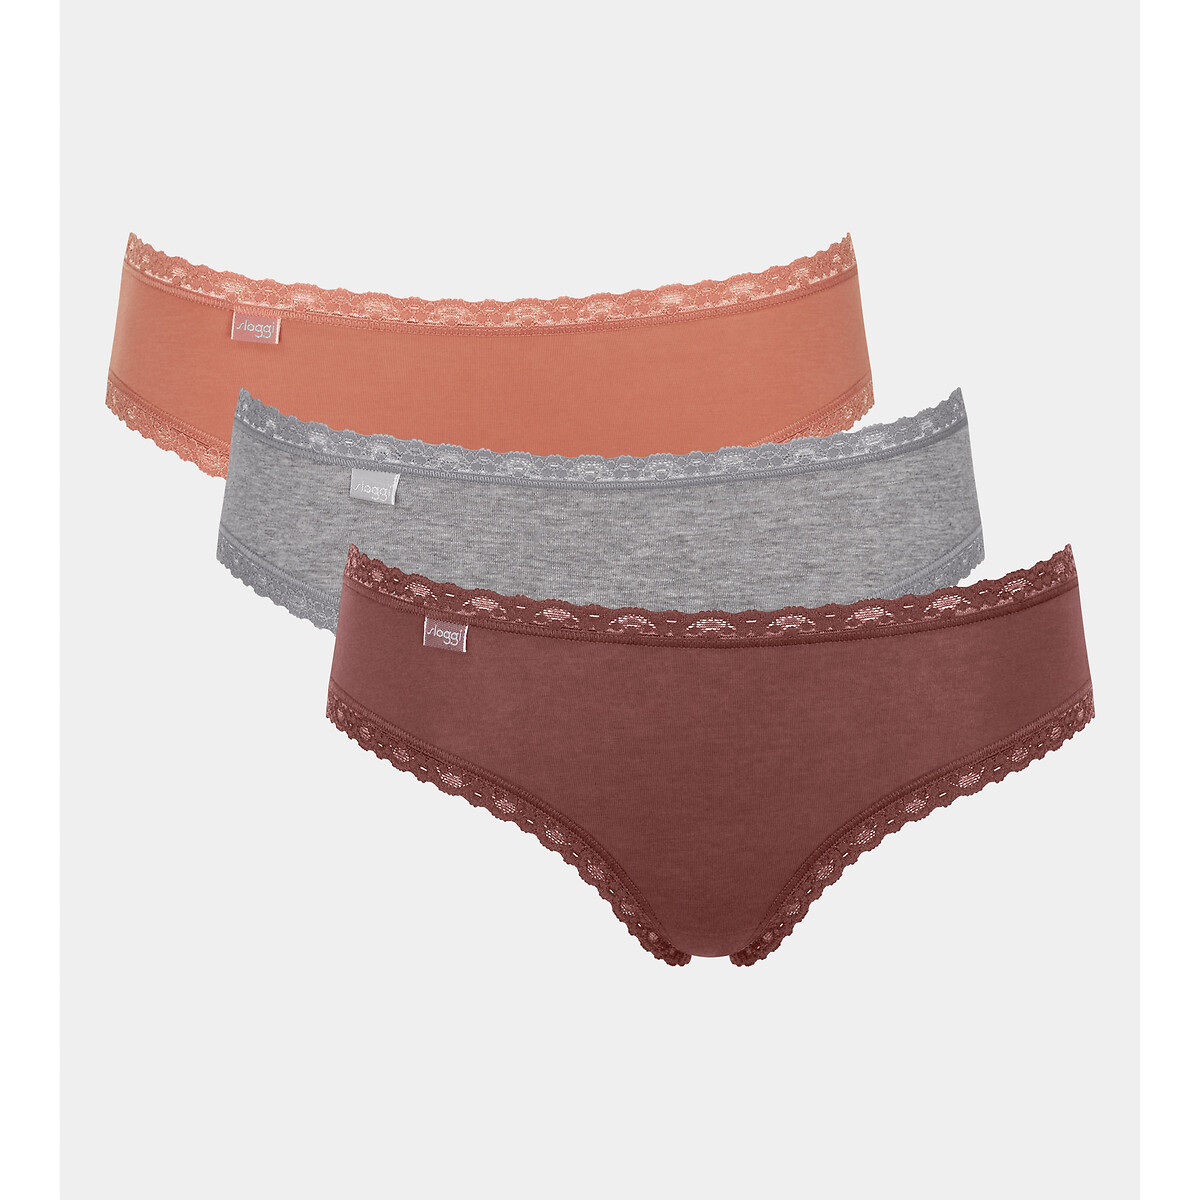 Pack of 3 24/7 weekend high cut knickers in cotton Sloggi